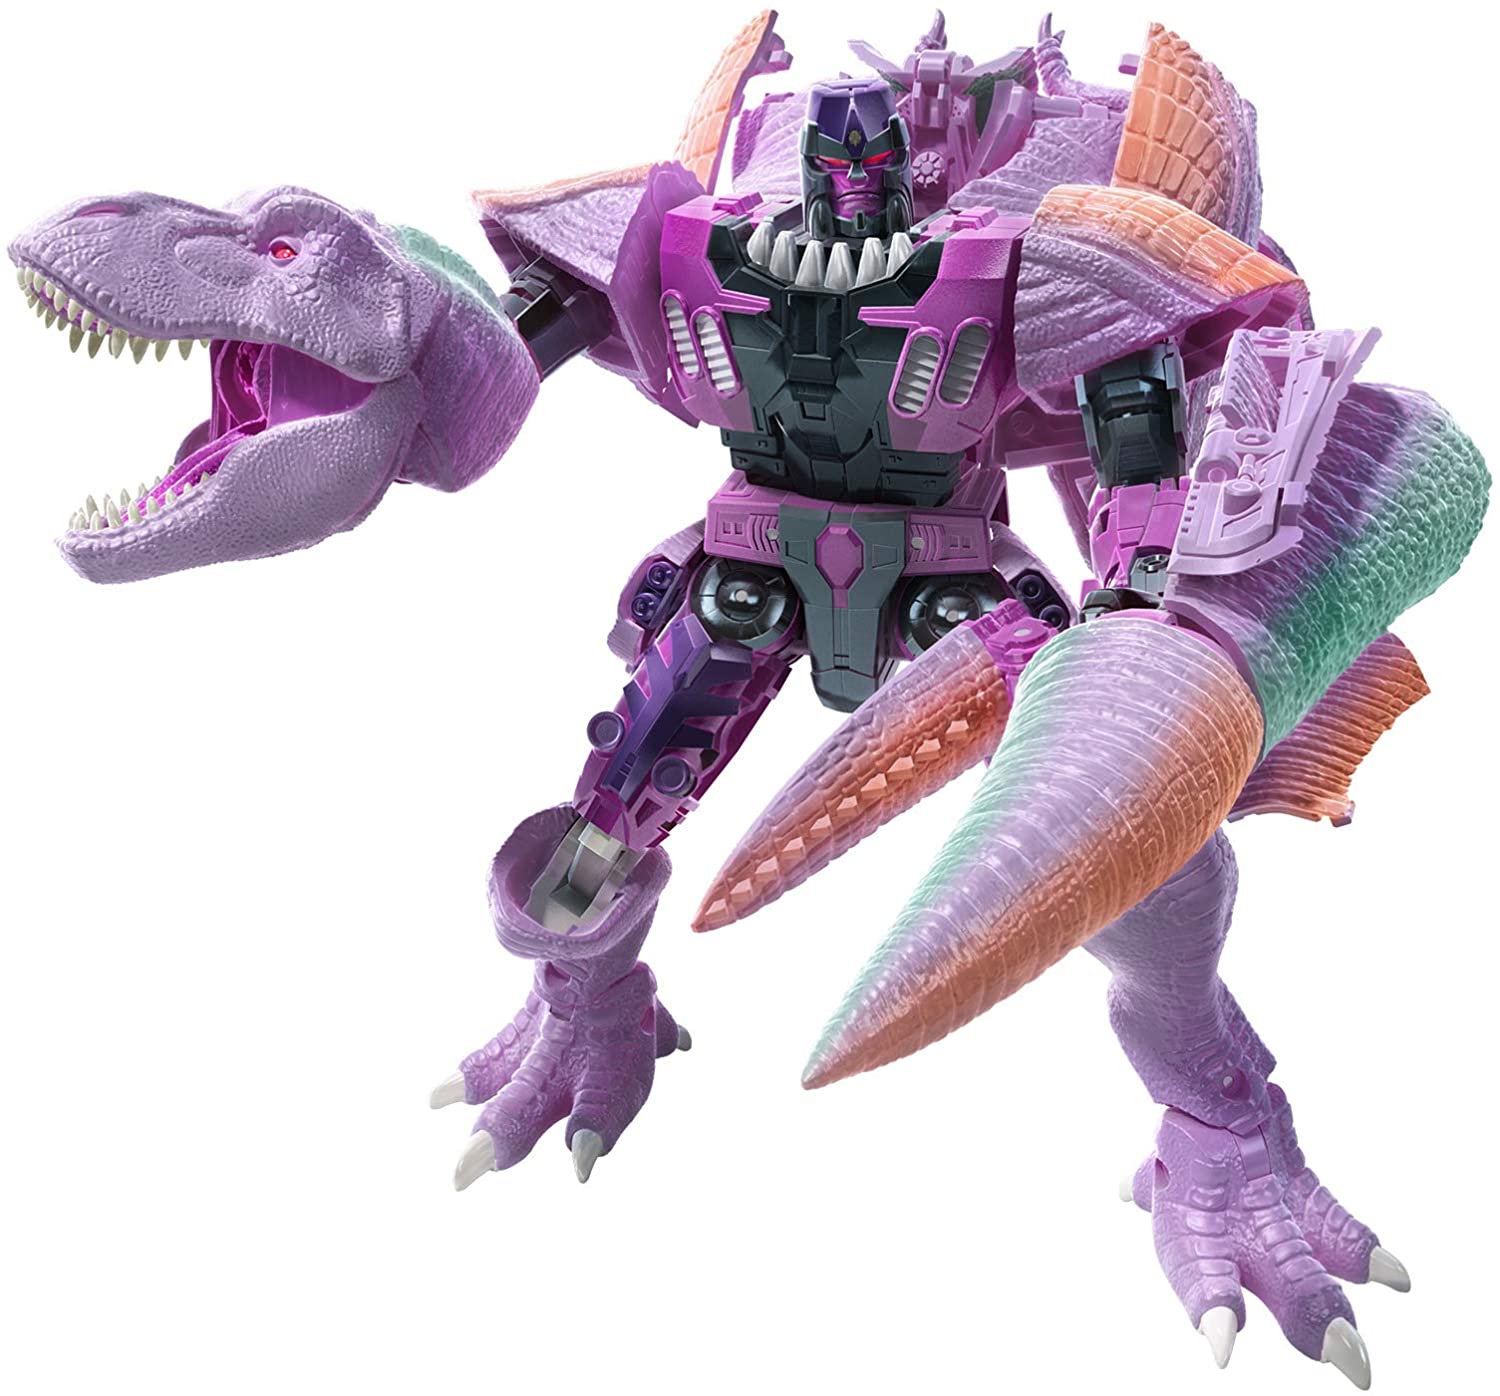 Transformers Toys Generations War for Cybertron: Kingdom Leader WFC-K10 Megatron (Beast) Action Figure - 8 and Up, 7.5-inch - Transformer action figure Heretoserveyou